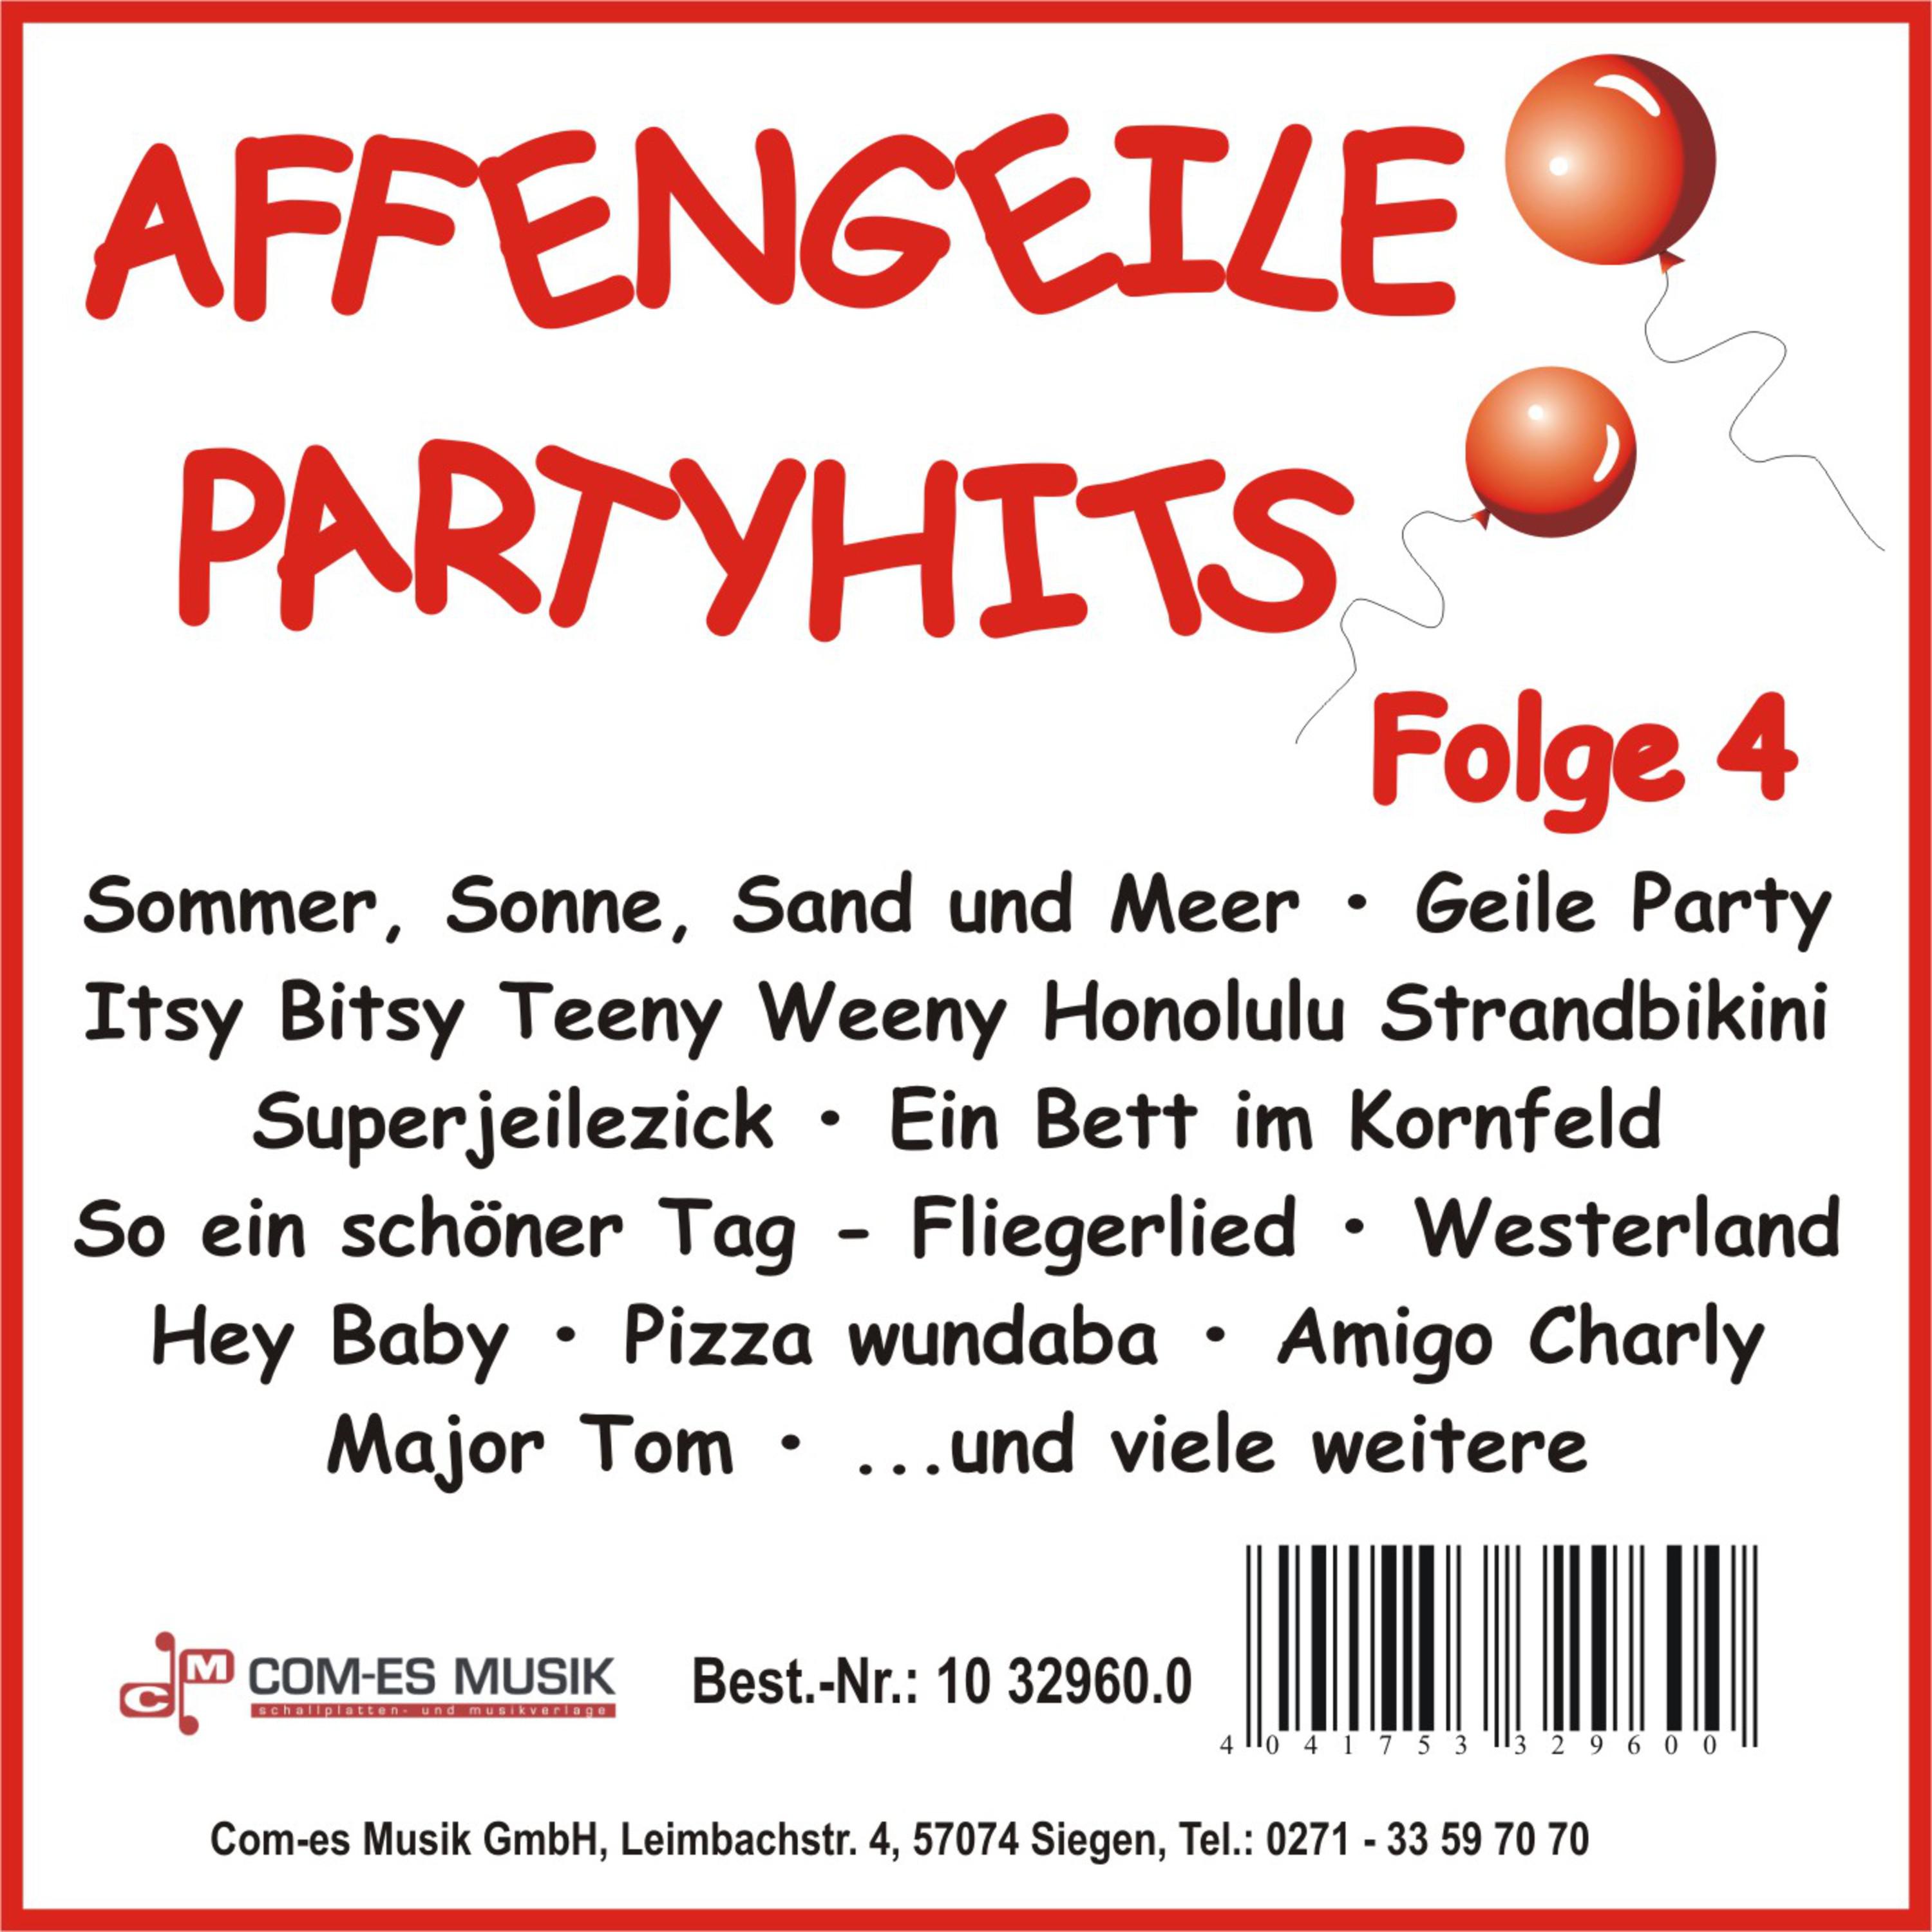 Affengeile-Partyhits, Folge 4